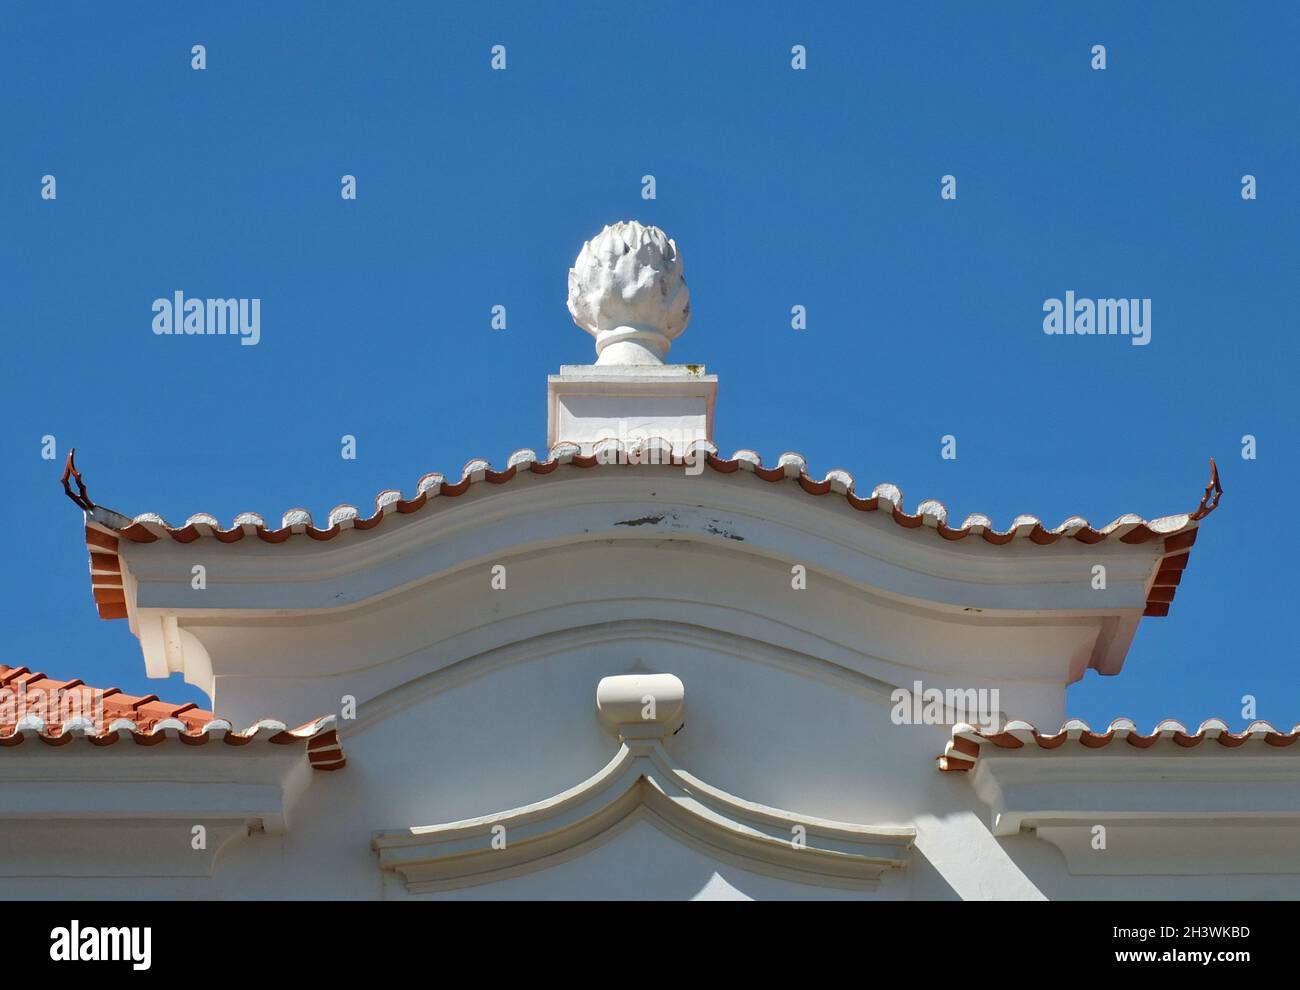 Playful architectural element in the Alentejo - Portugal Stock Photo